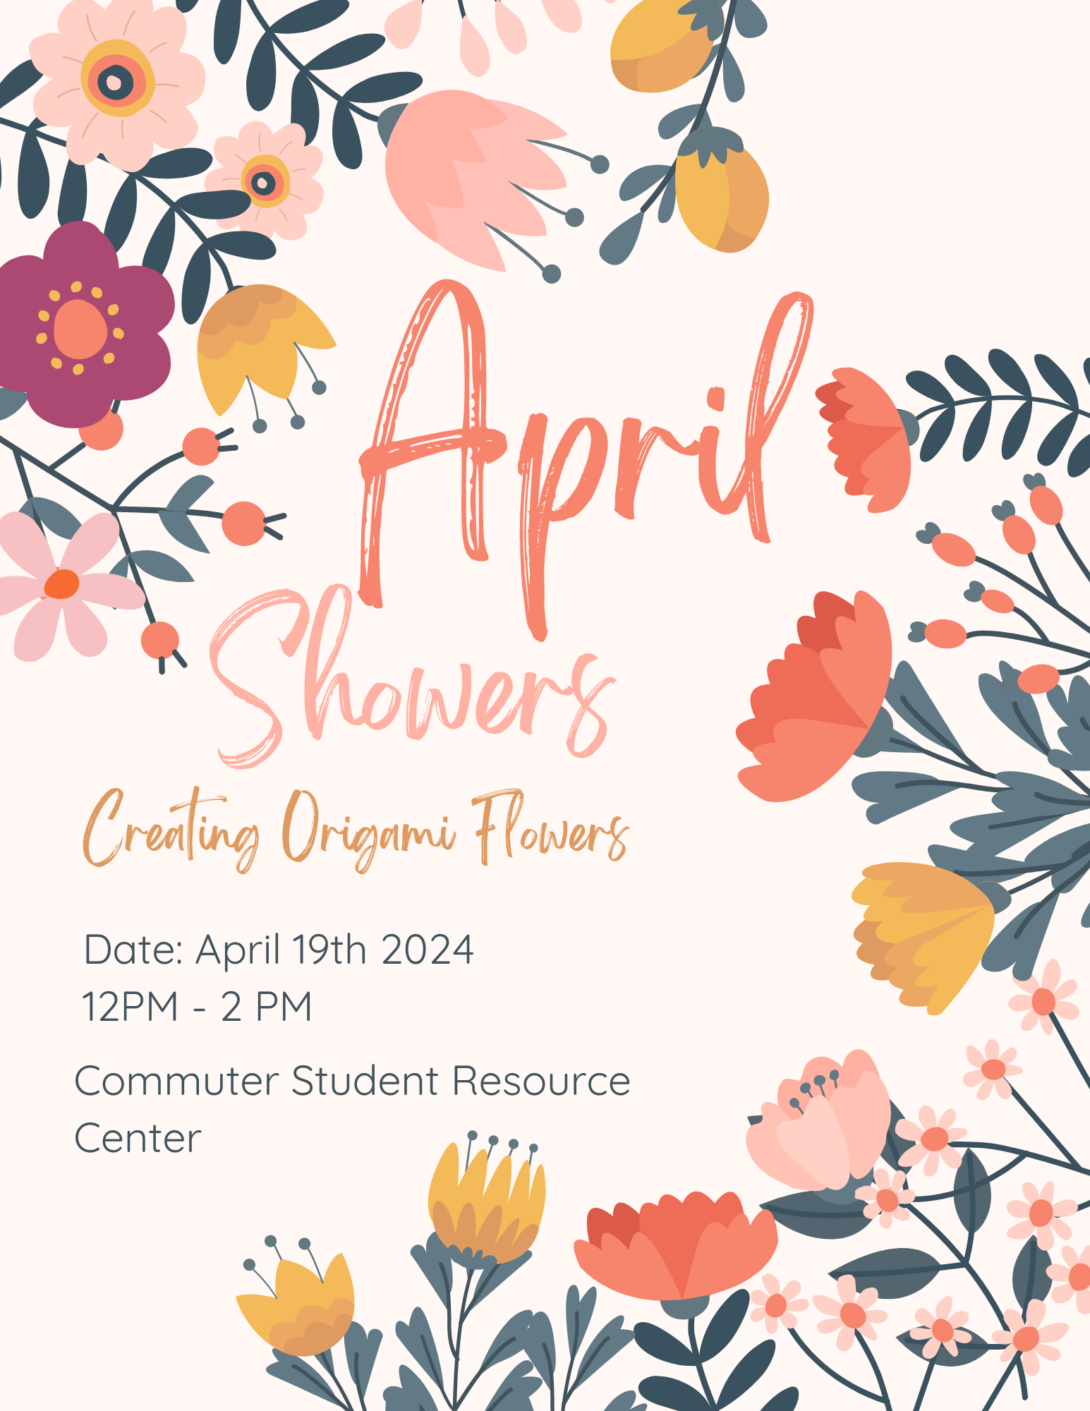 April Showers Creating Origami Flowers, April 19 from 12-2 pm